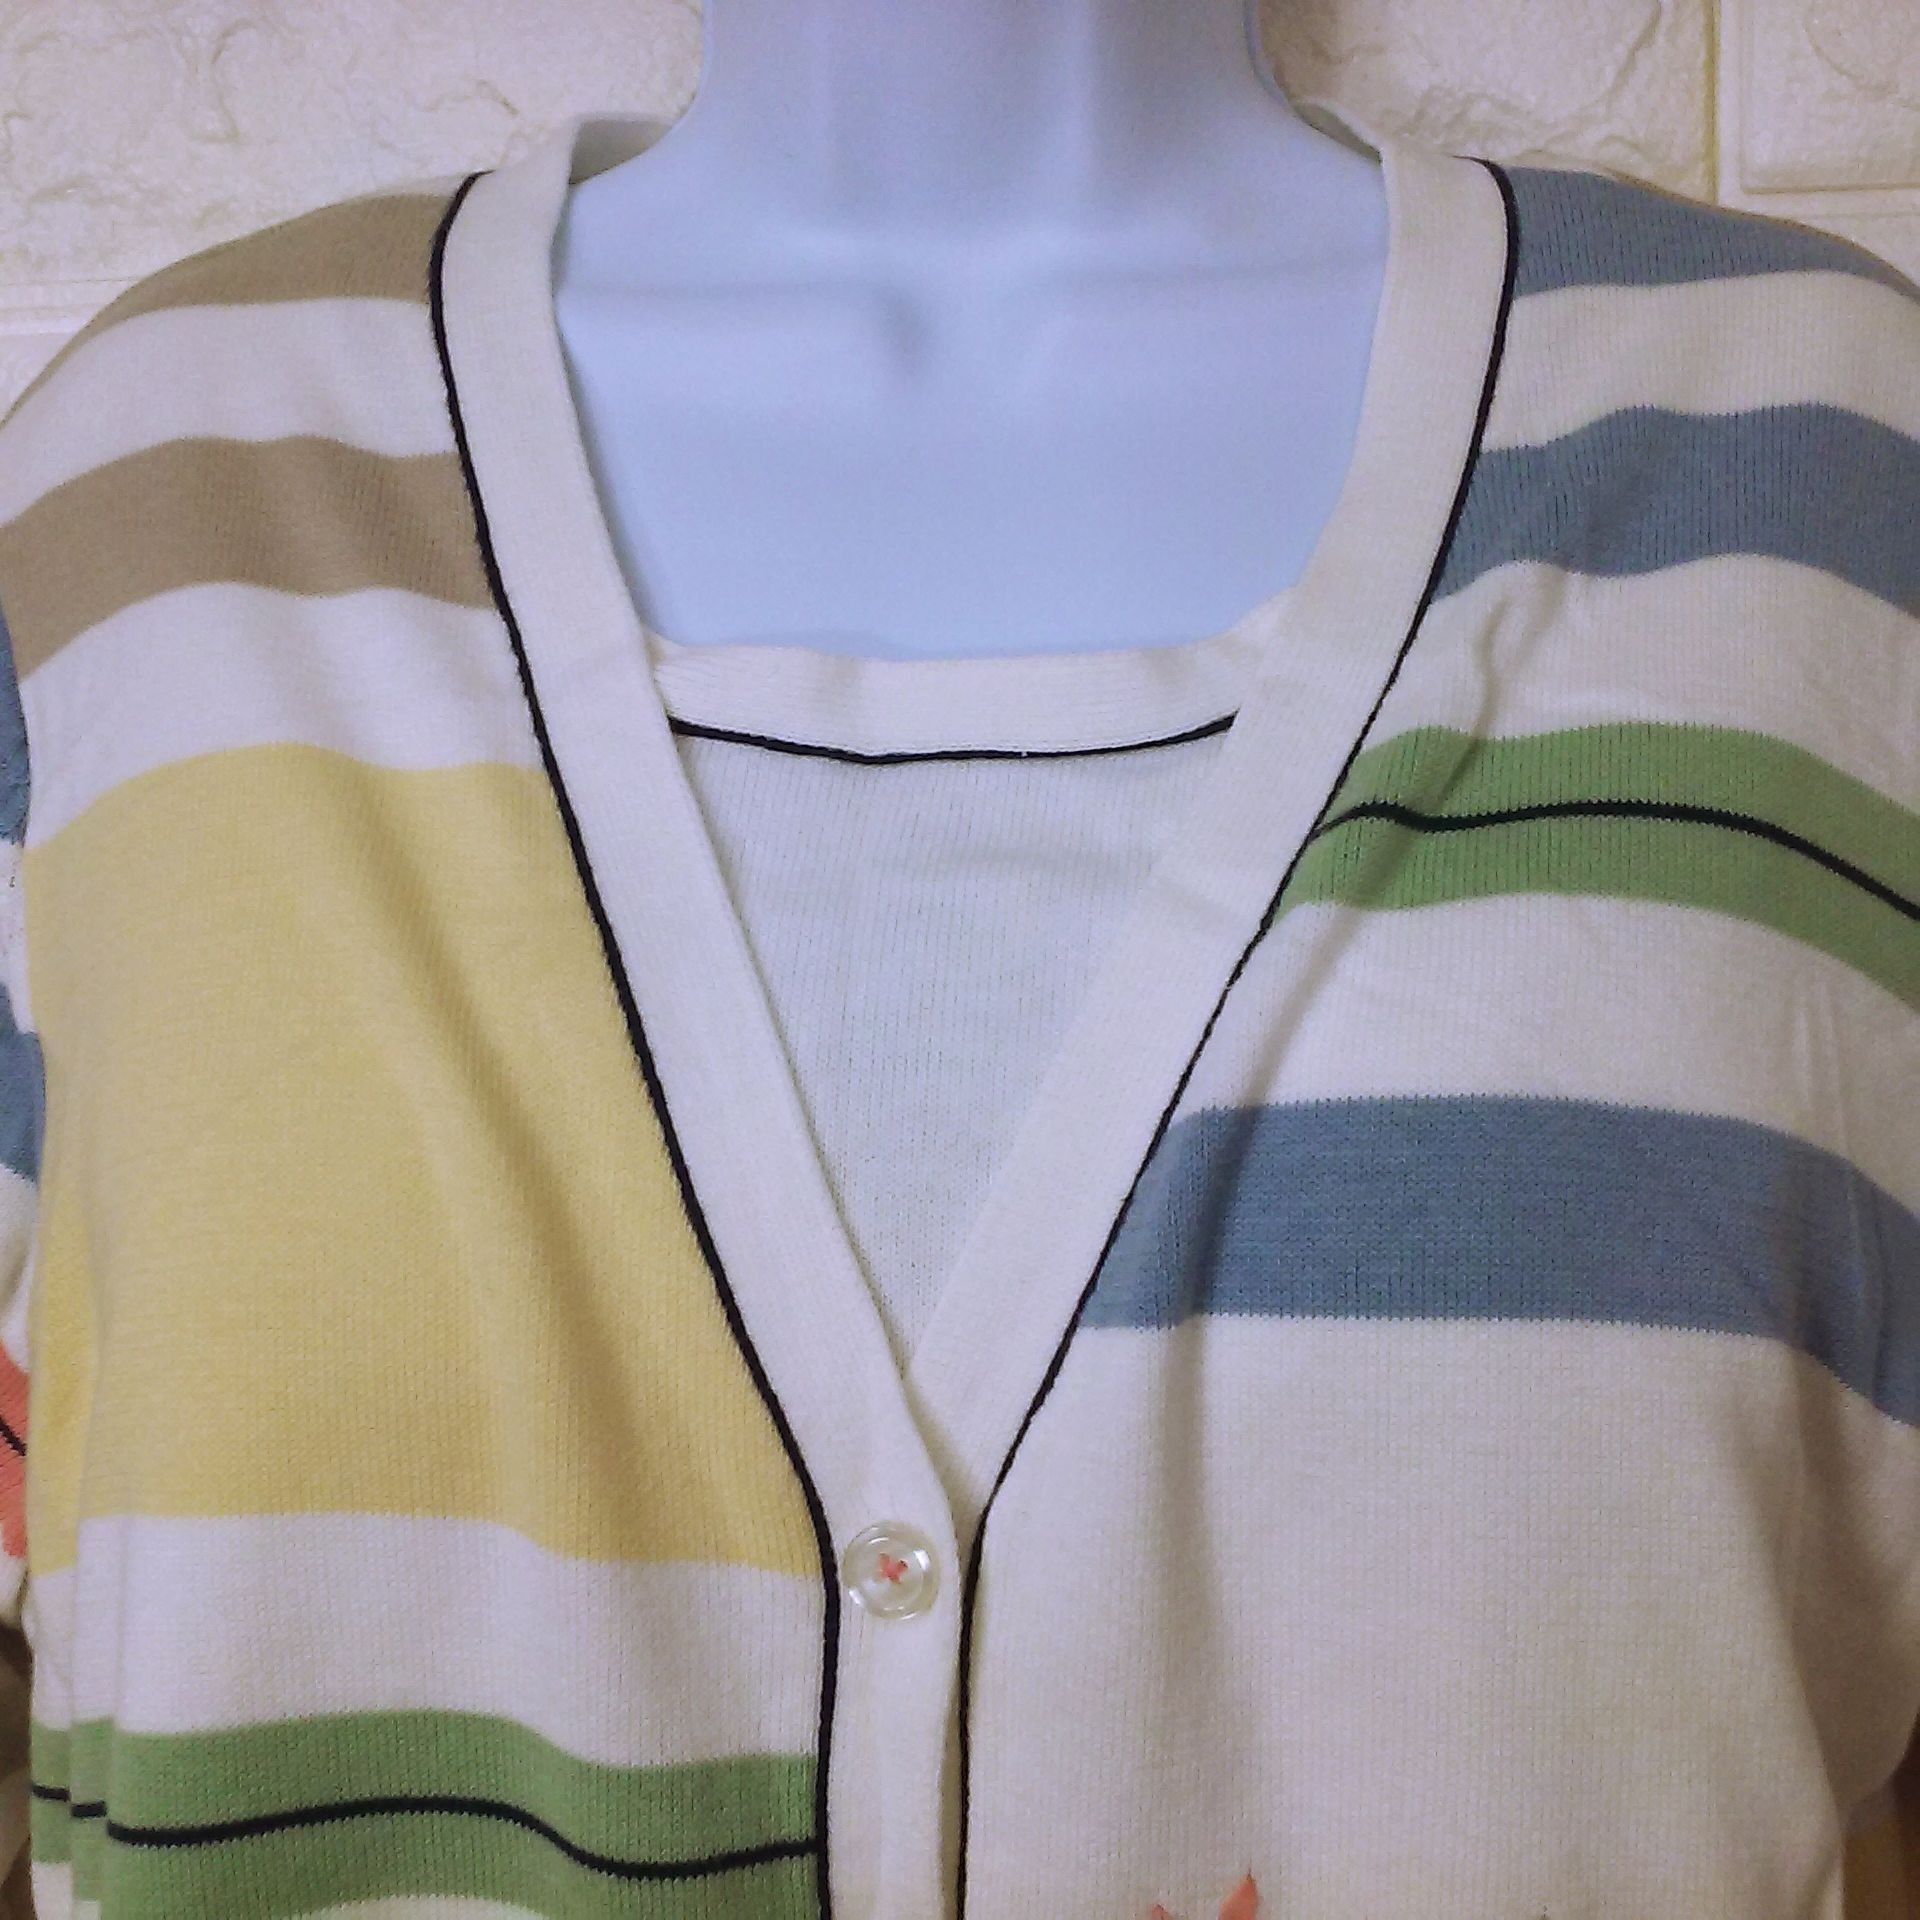 Vintage 90s Koret Knit Cardigan Top Novelty Sweater Striped Classic Size L / US 10 / IT 46 - 11 Preview